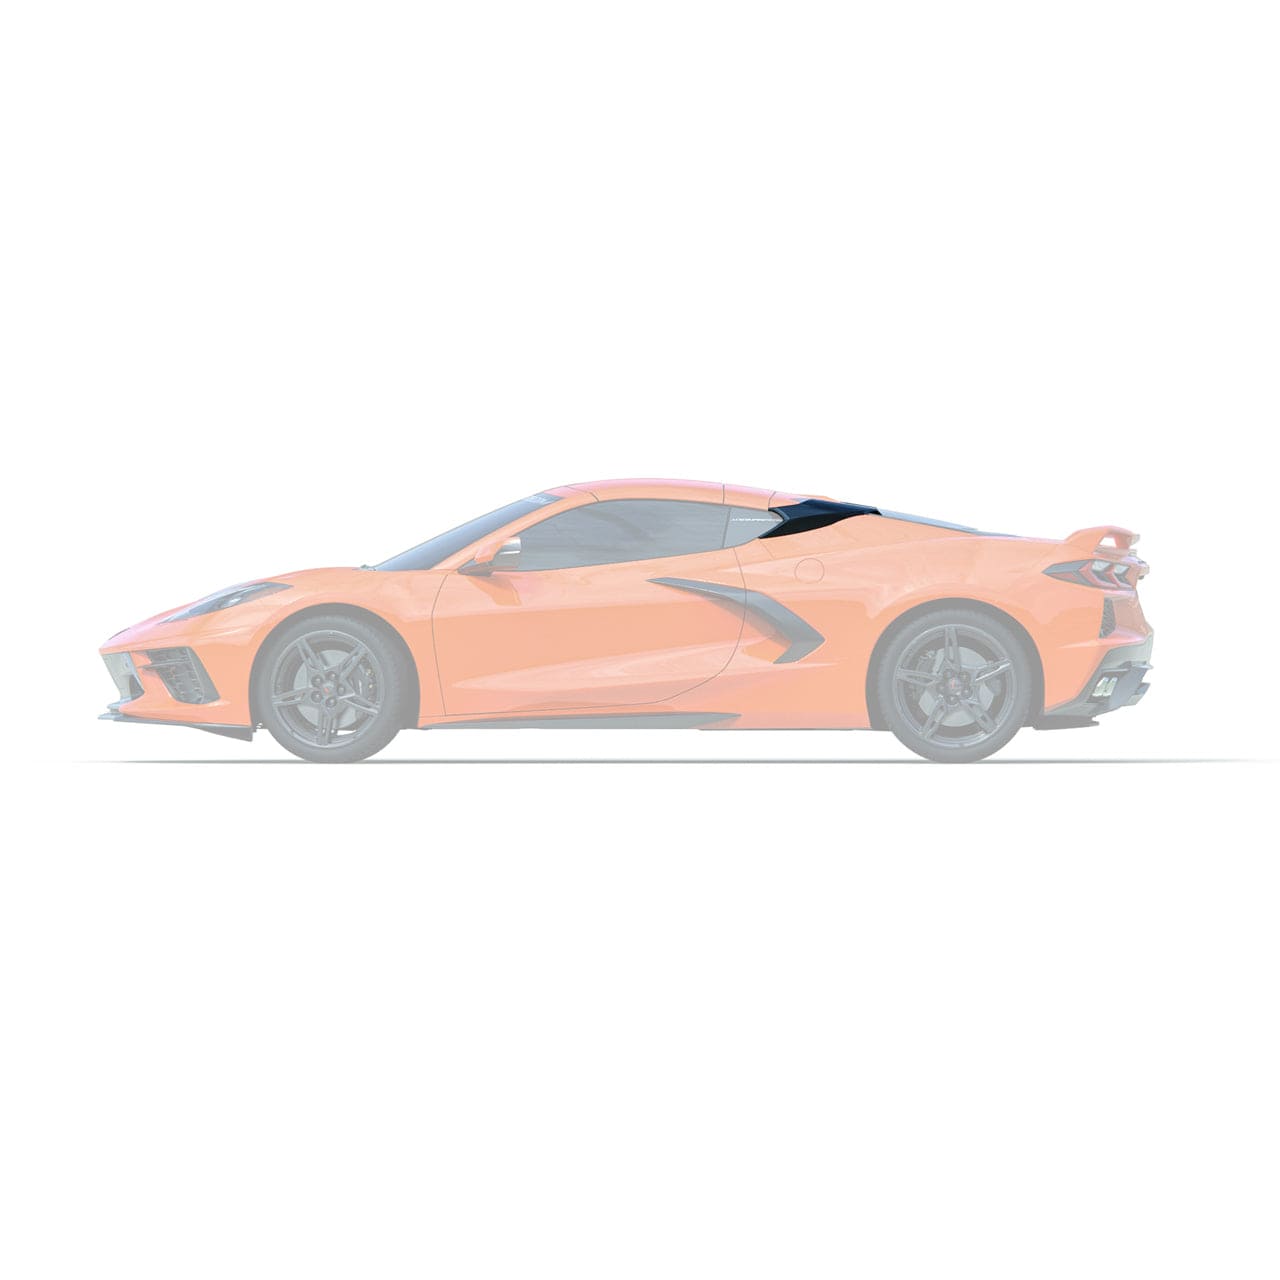 An opaque render of a C8 corvette with the RQ Intake Ports highlight on the car